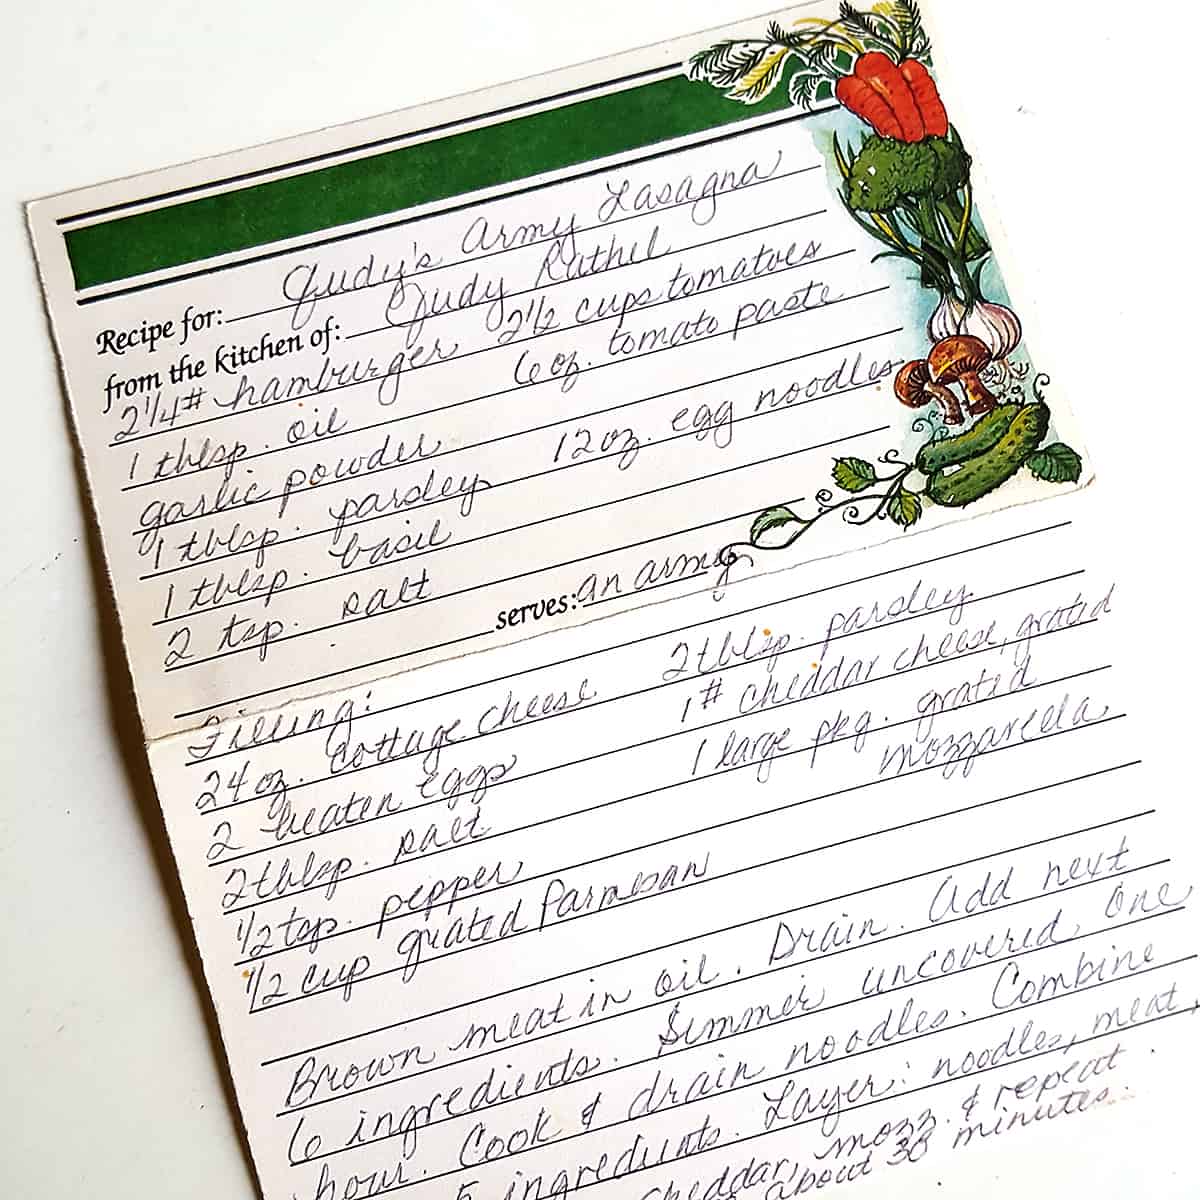 Photo of the handwritten recipe for "Judy's Army Lasagna."